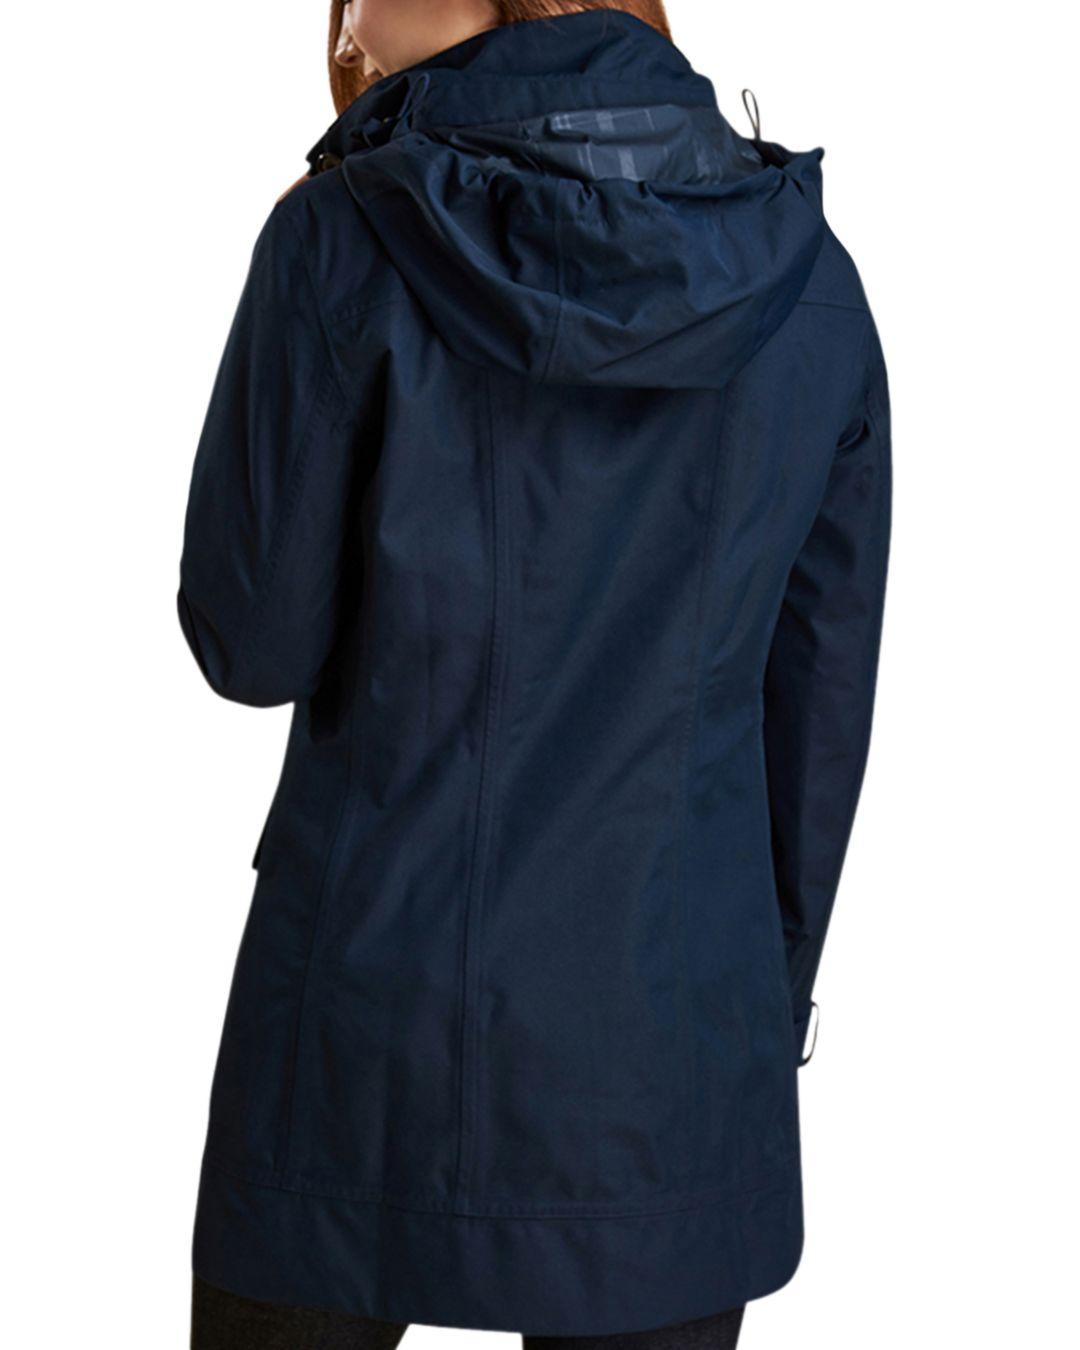 Barbour Backwater Jacket in Navy (Blue) - Lyst